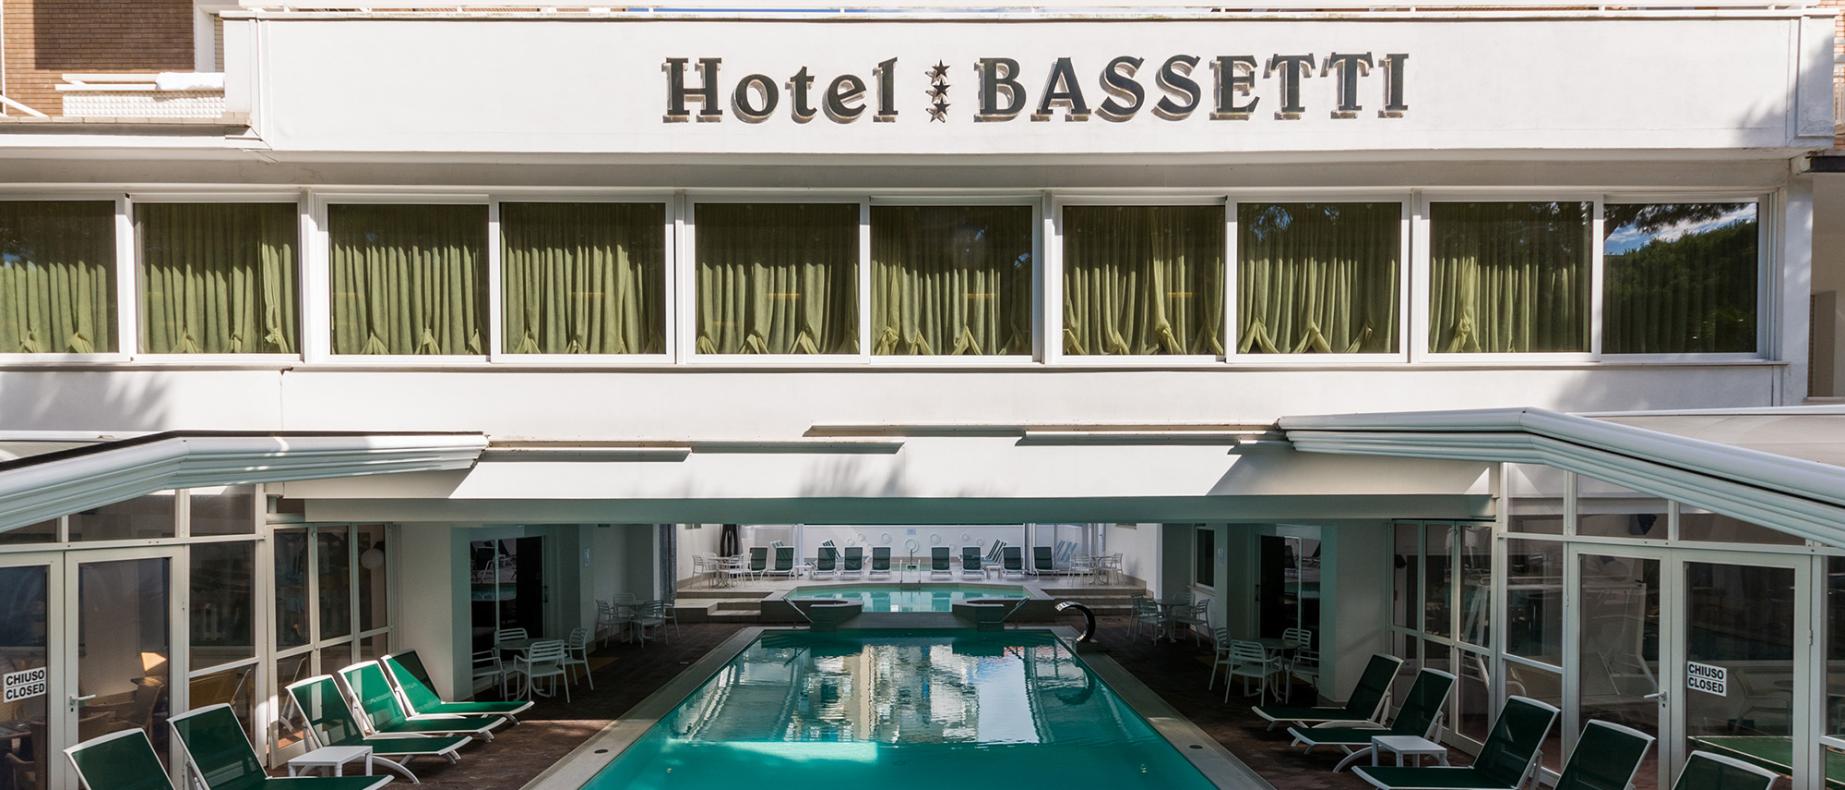 hotelbassetti fr 1-fr-m12-dcembre 003